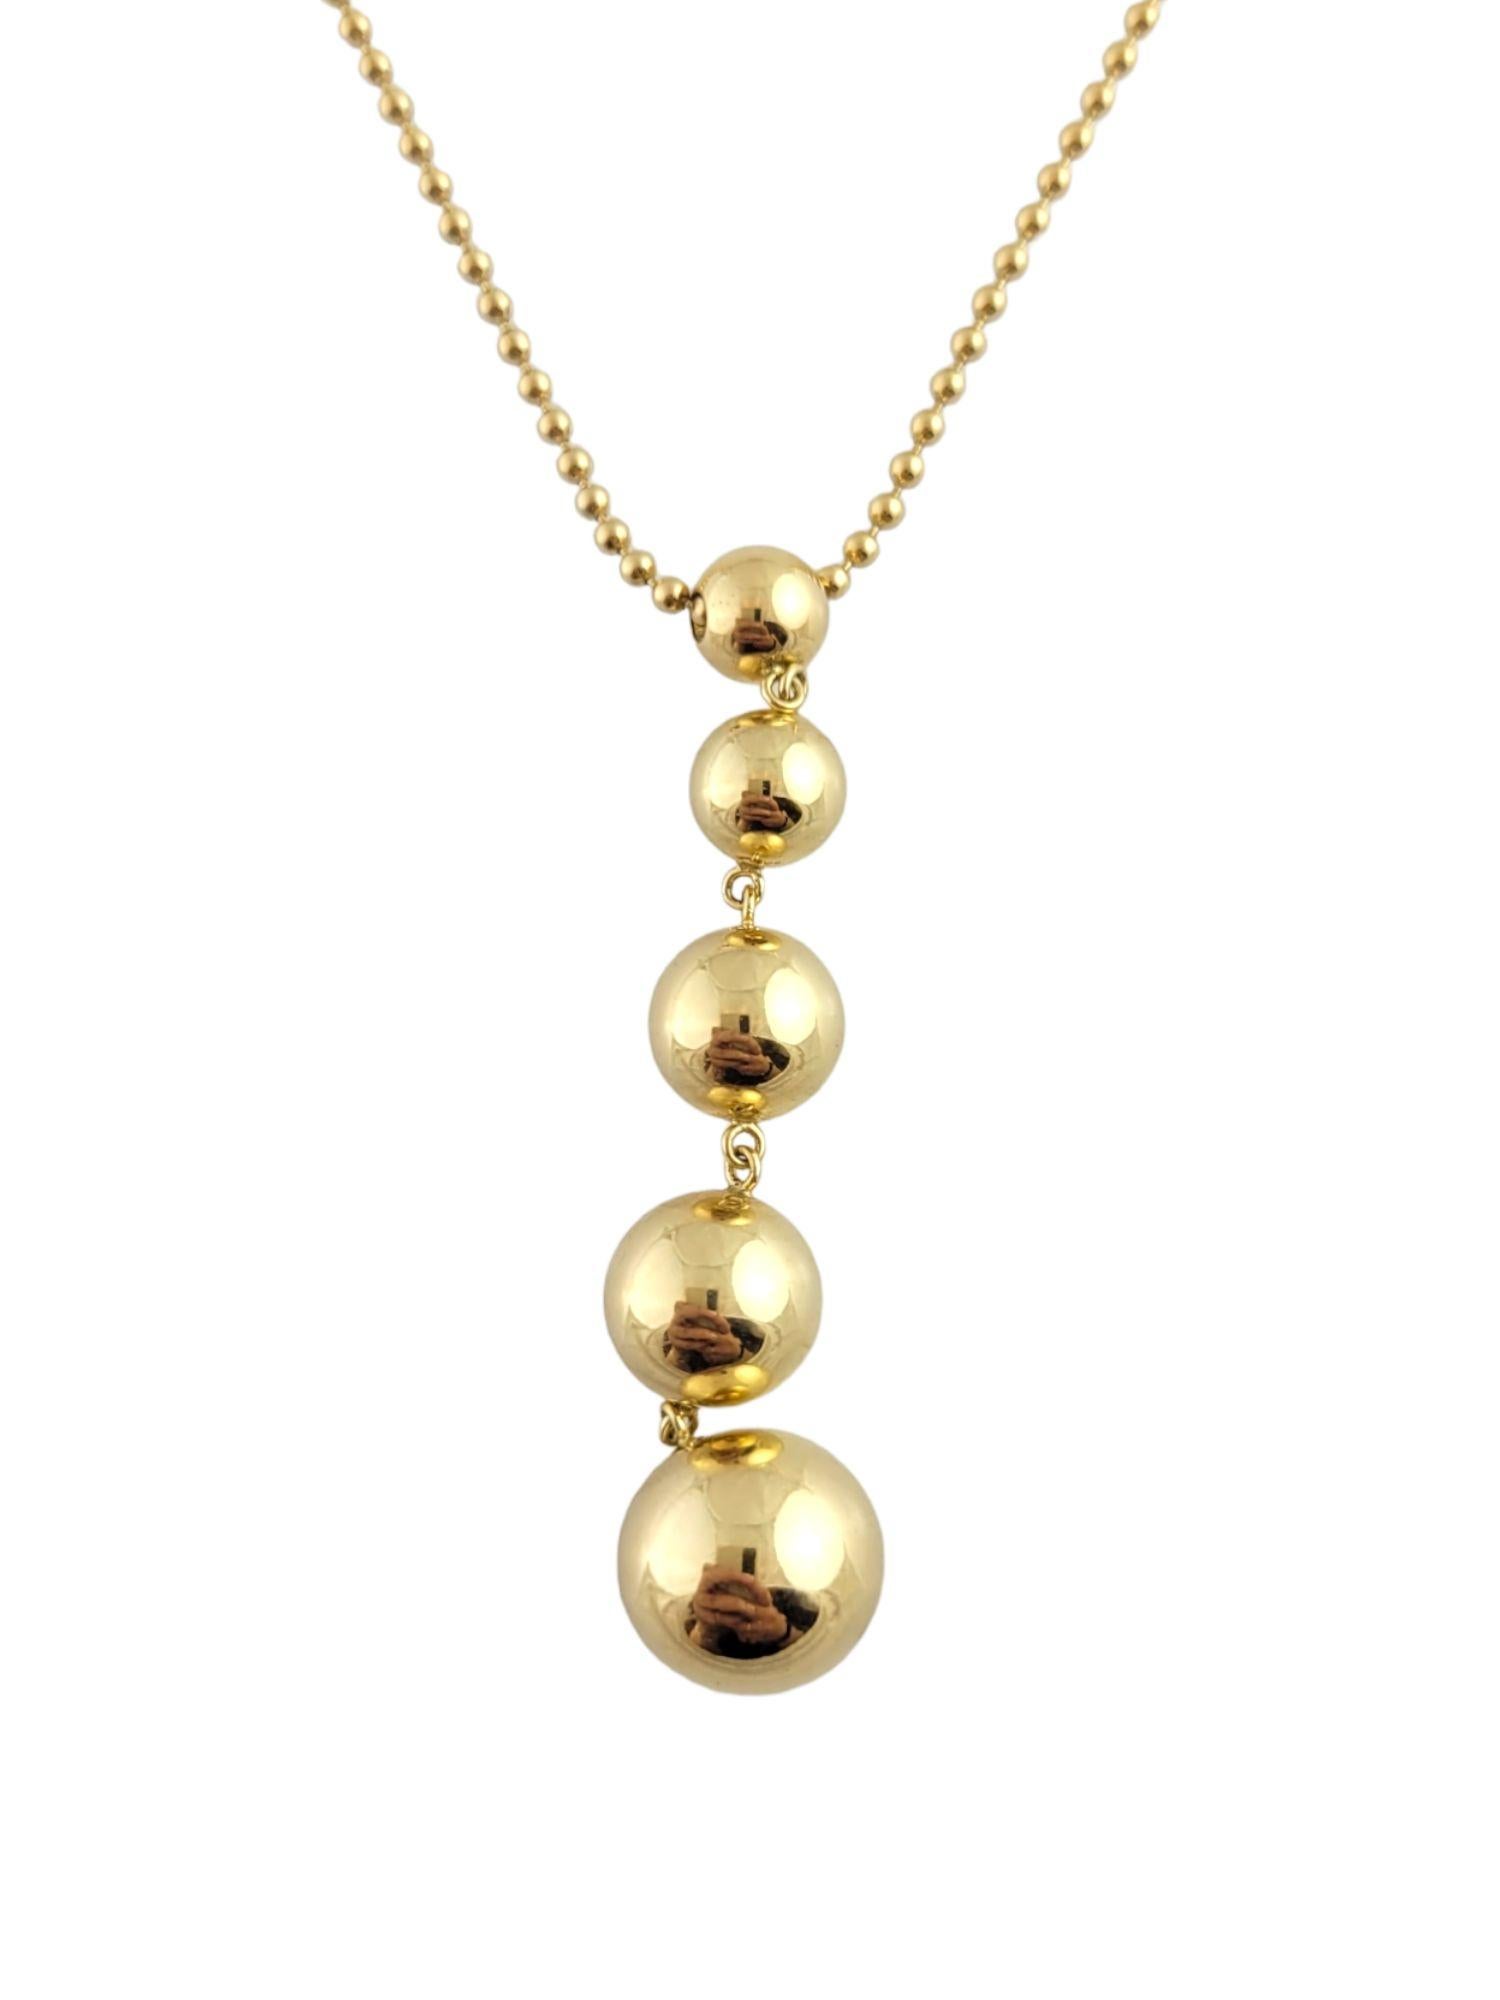 Tiffany & Co 18K Yellow Gold Graduated Bead Drop Pendant Necklace #14791 In Good Condition For Sale In Washington Depot, CT